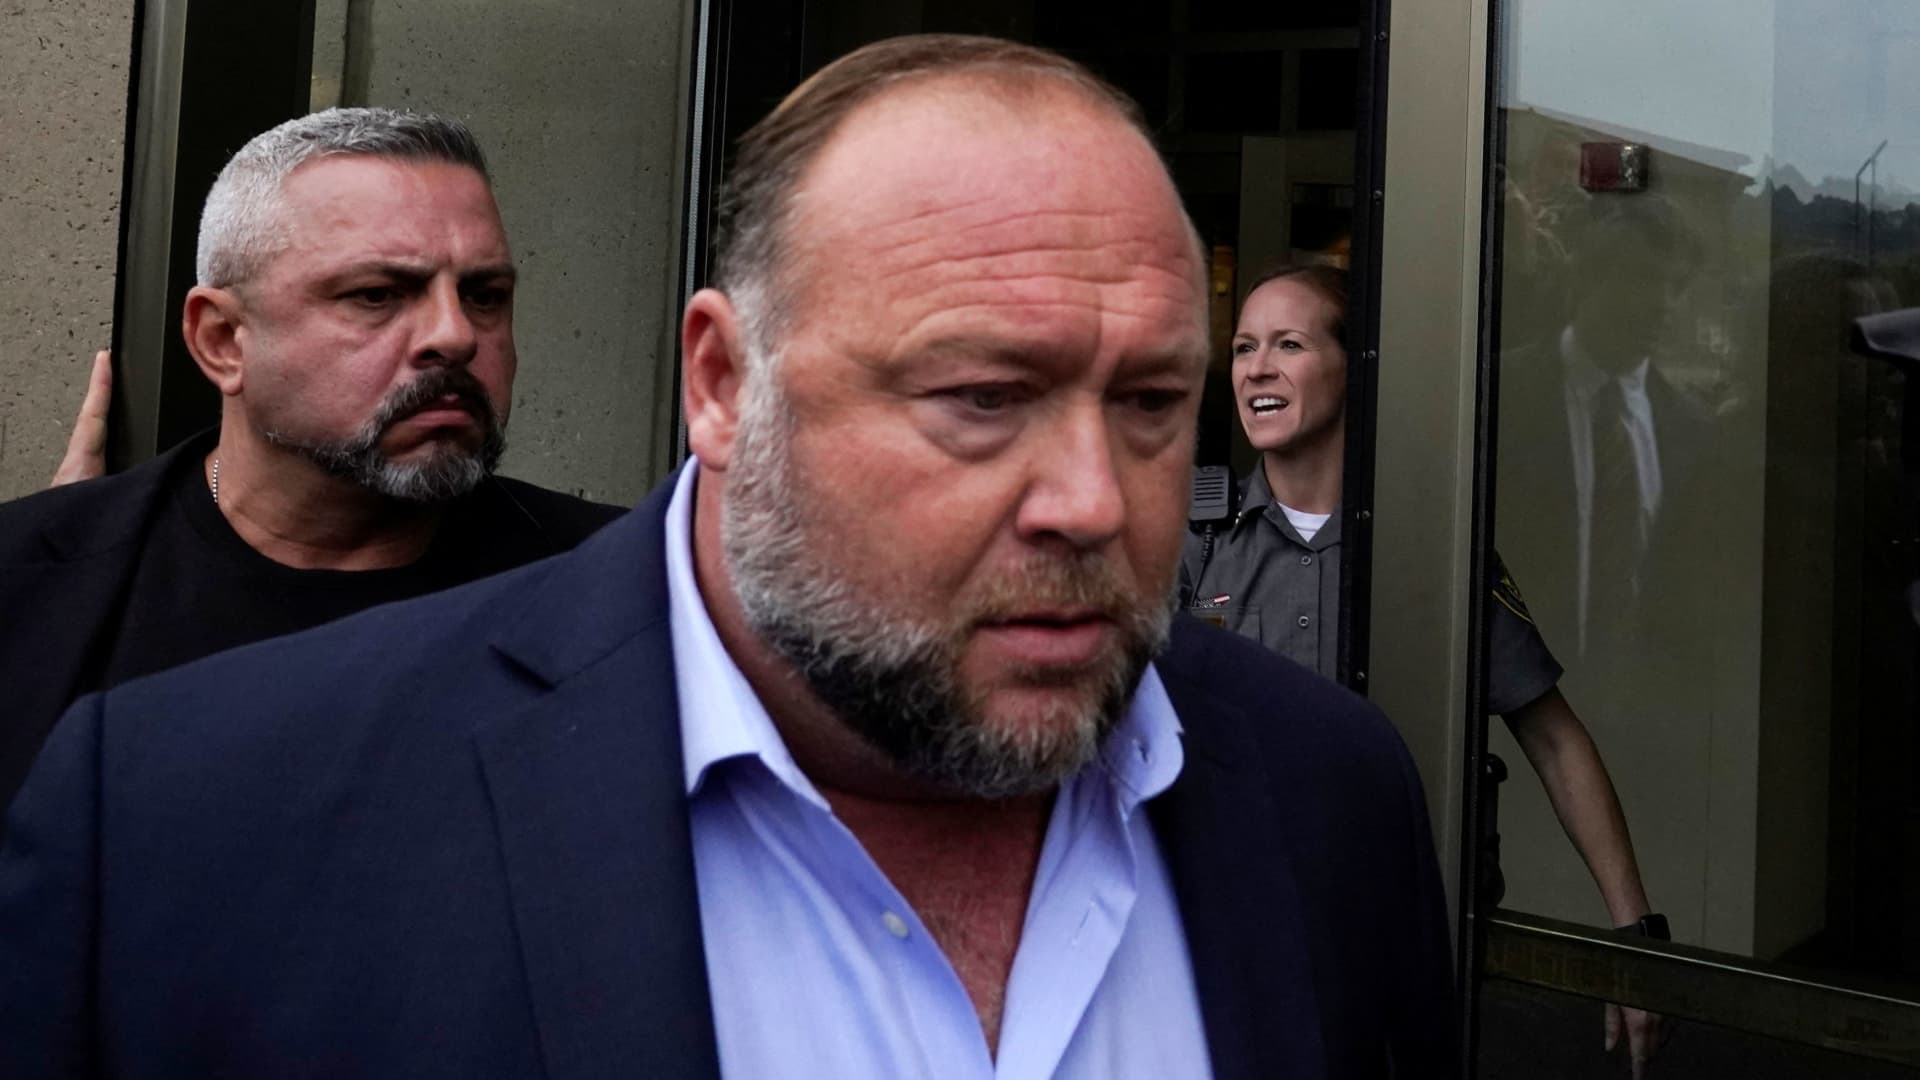 Alex Jones files for bankruptcy protection, lists Sandy Hook families as creditors